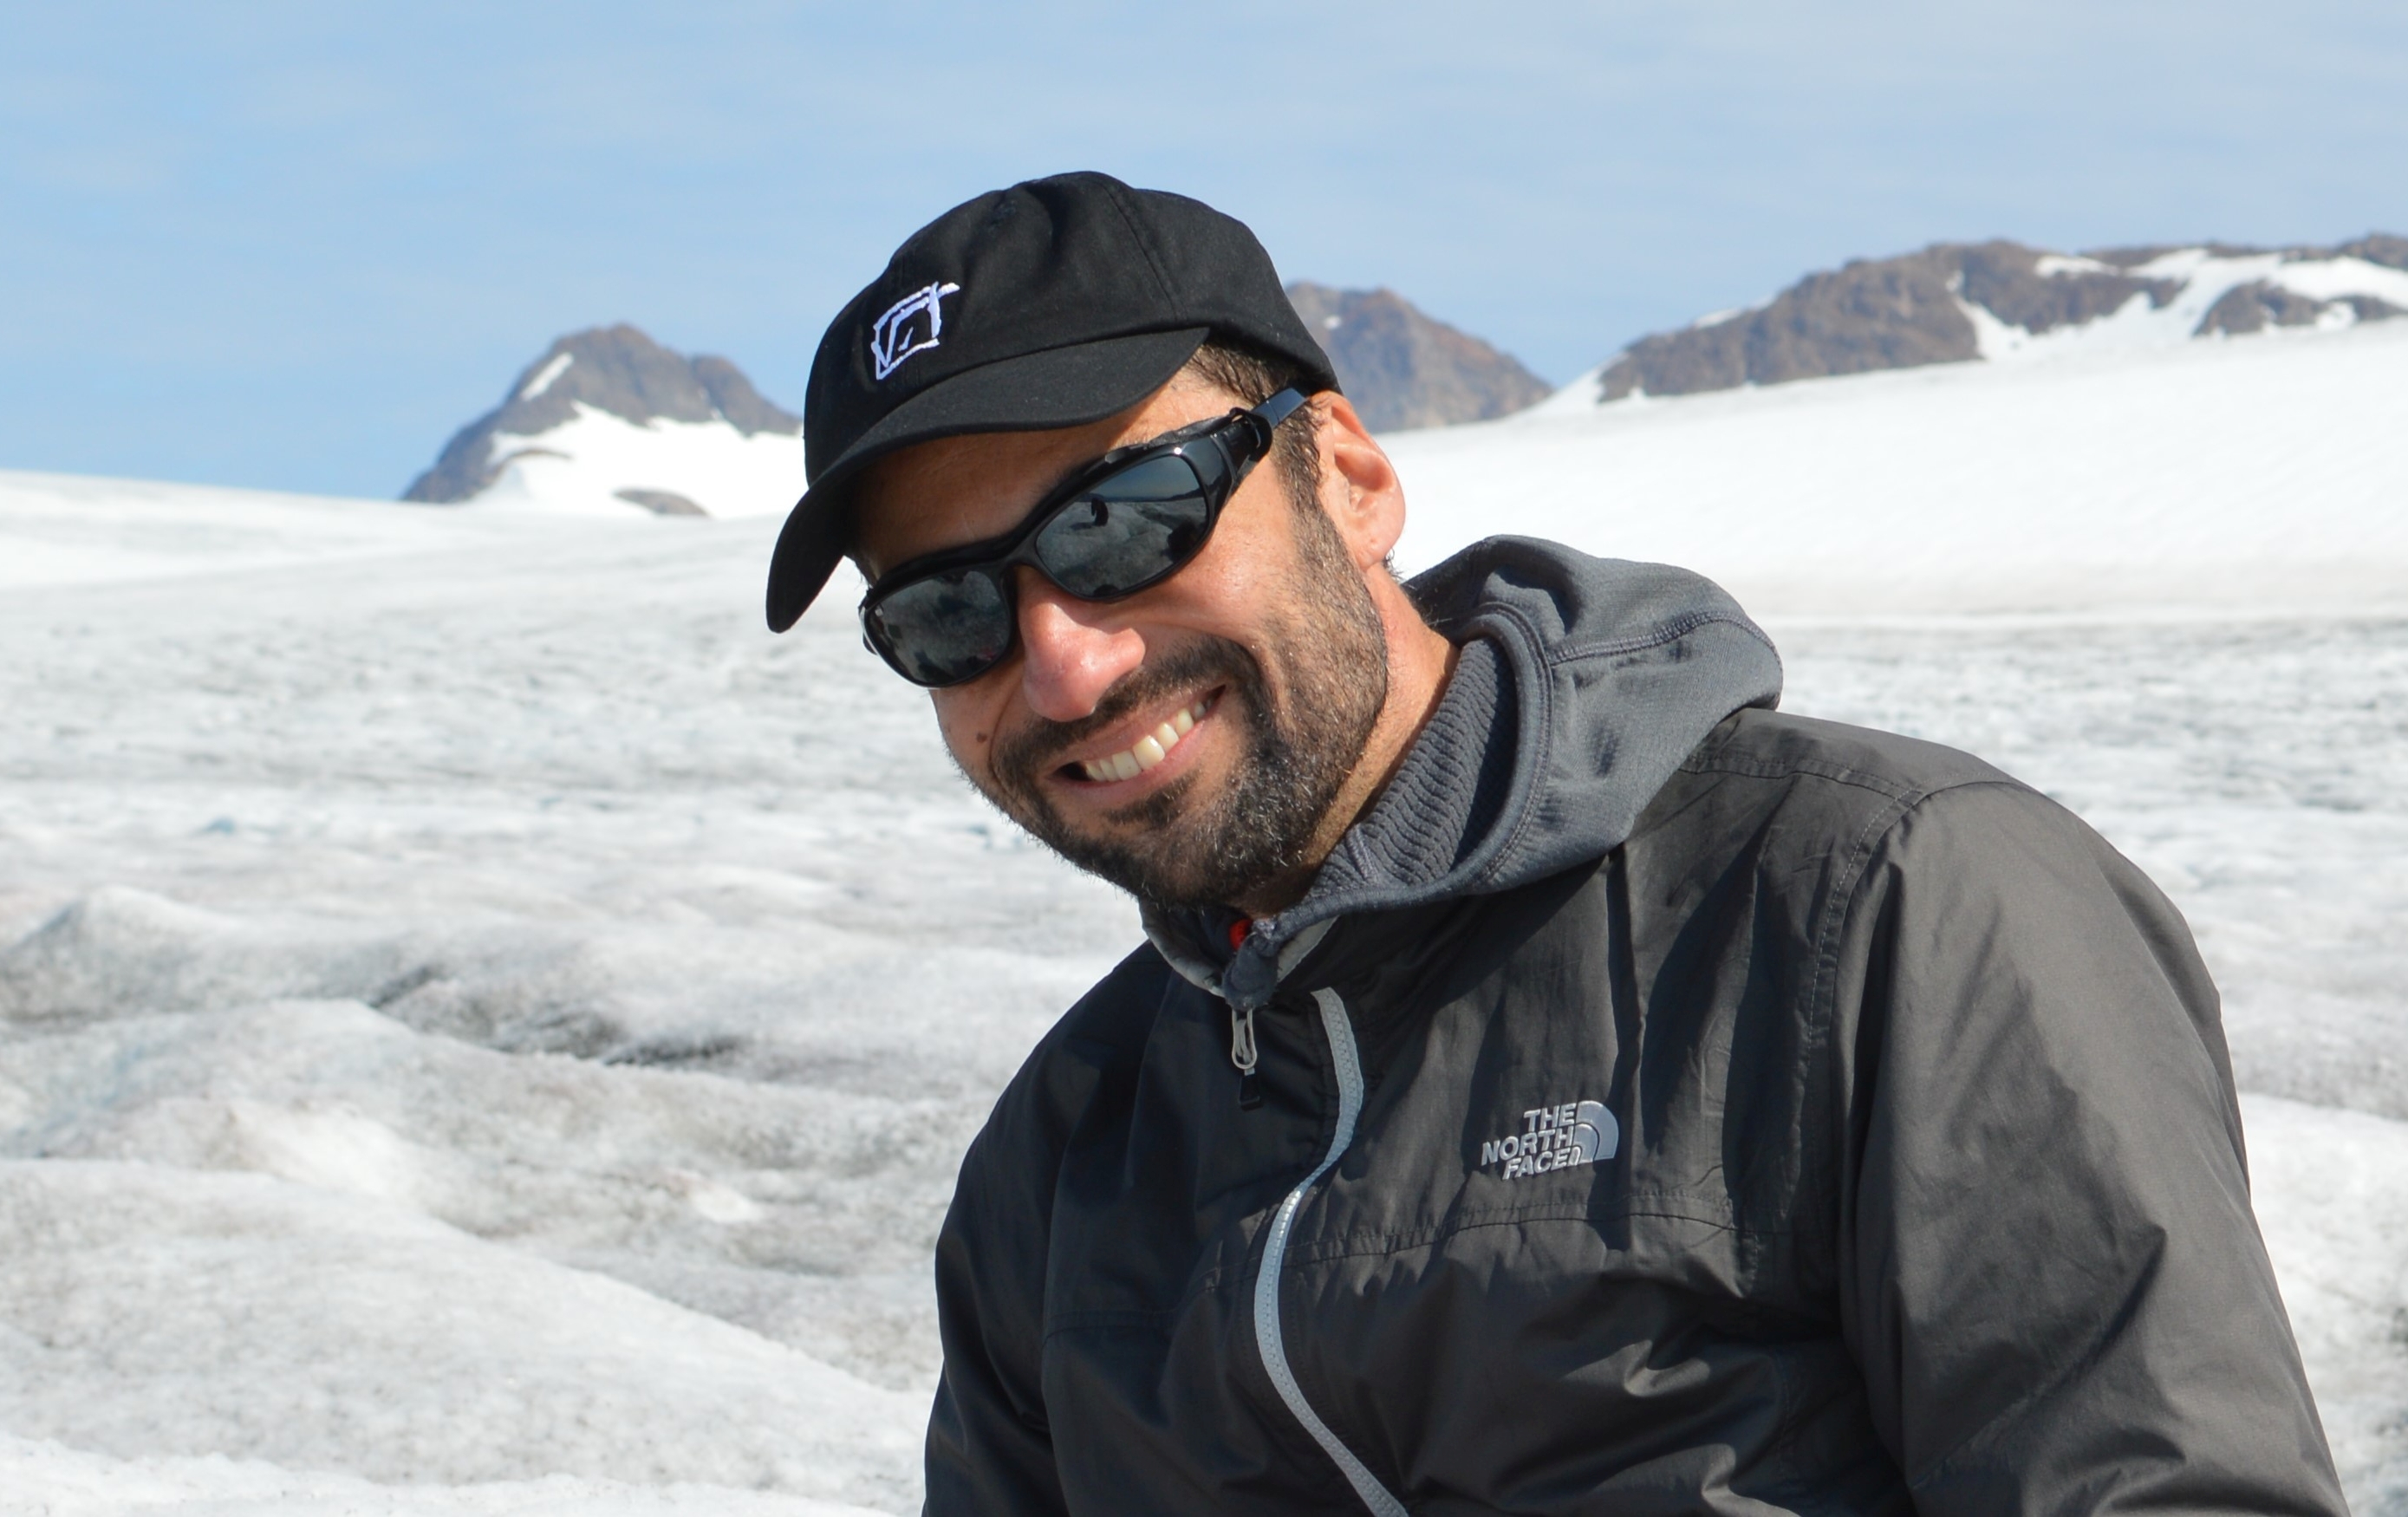 A portrait photo of Alexandre Anesio wearing a cap and sunglasses on the ice in Greenland.